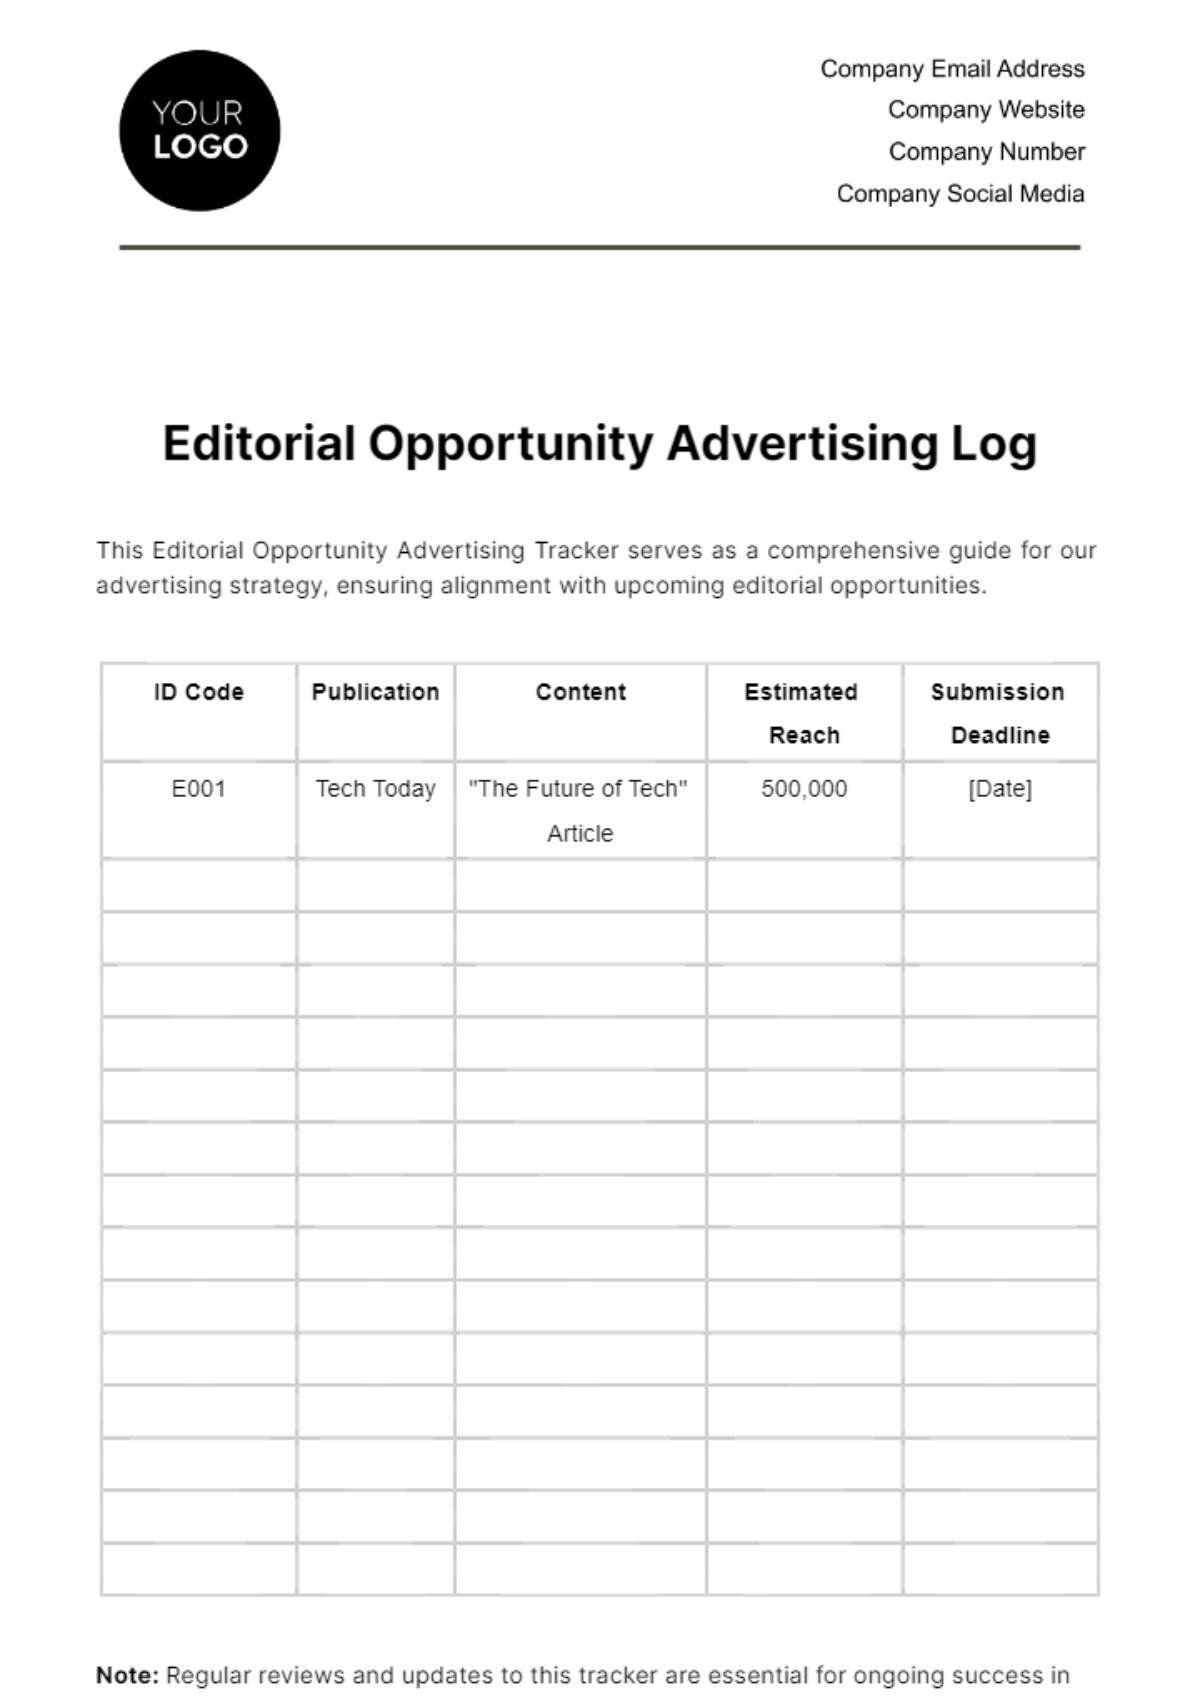 Editorial Opportunity Advertising Log Template